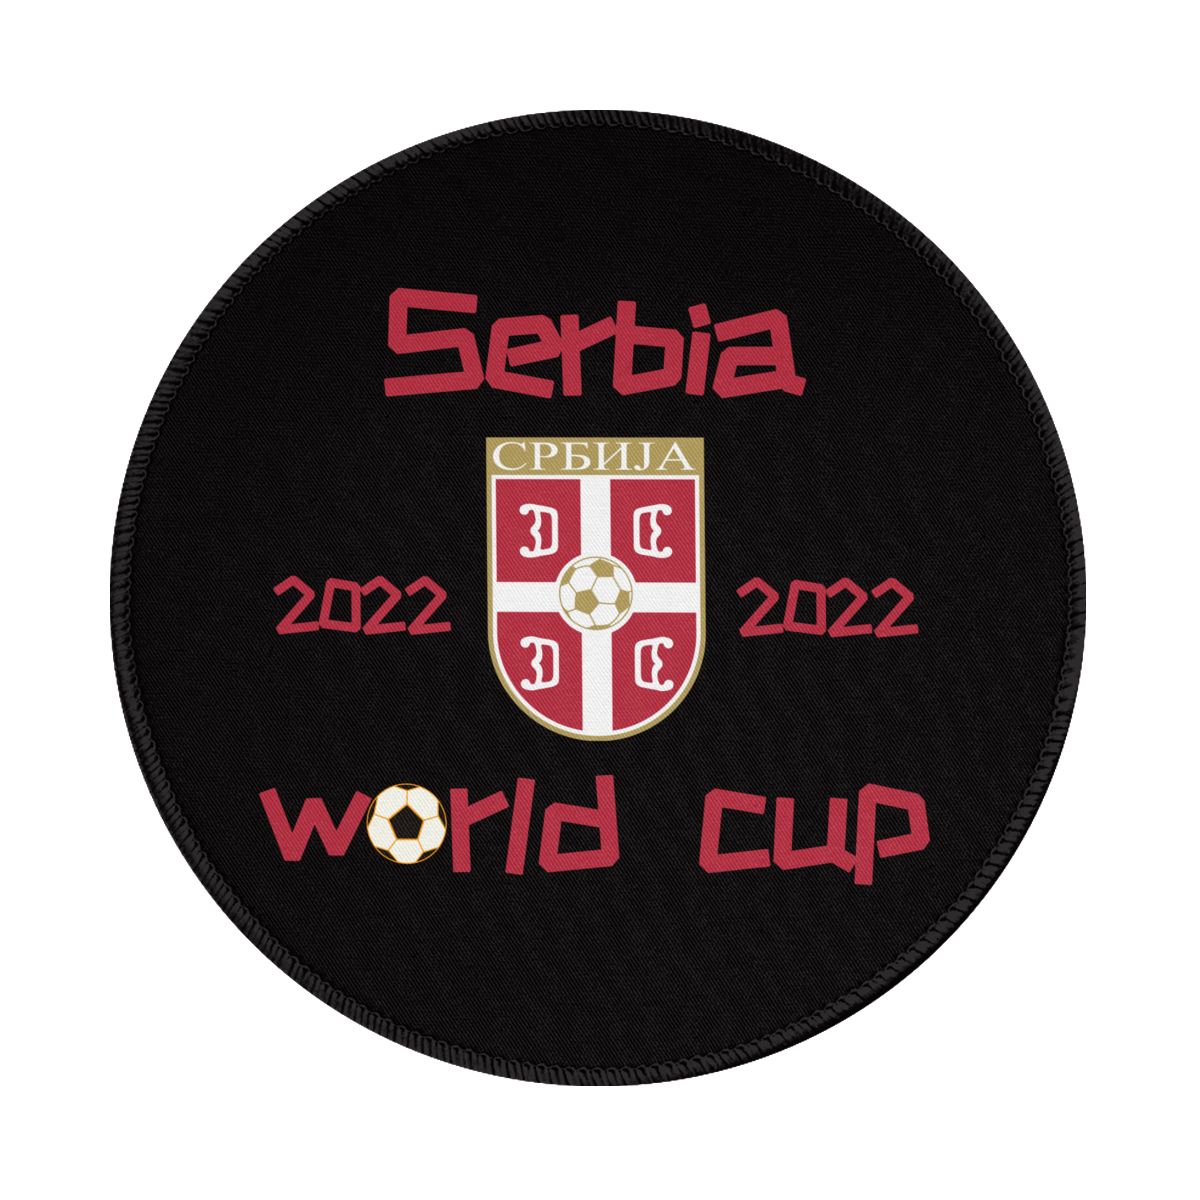 Serbia 2022 World Cup Team Logo Waterproof Round Mouse Pad for Wireless Mouse